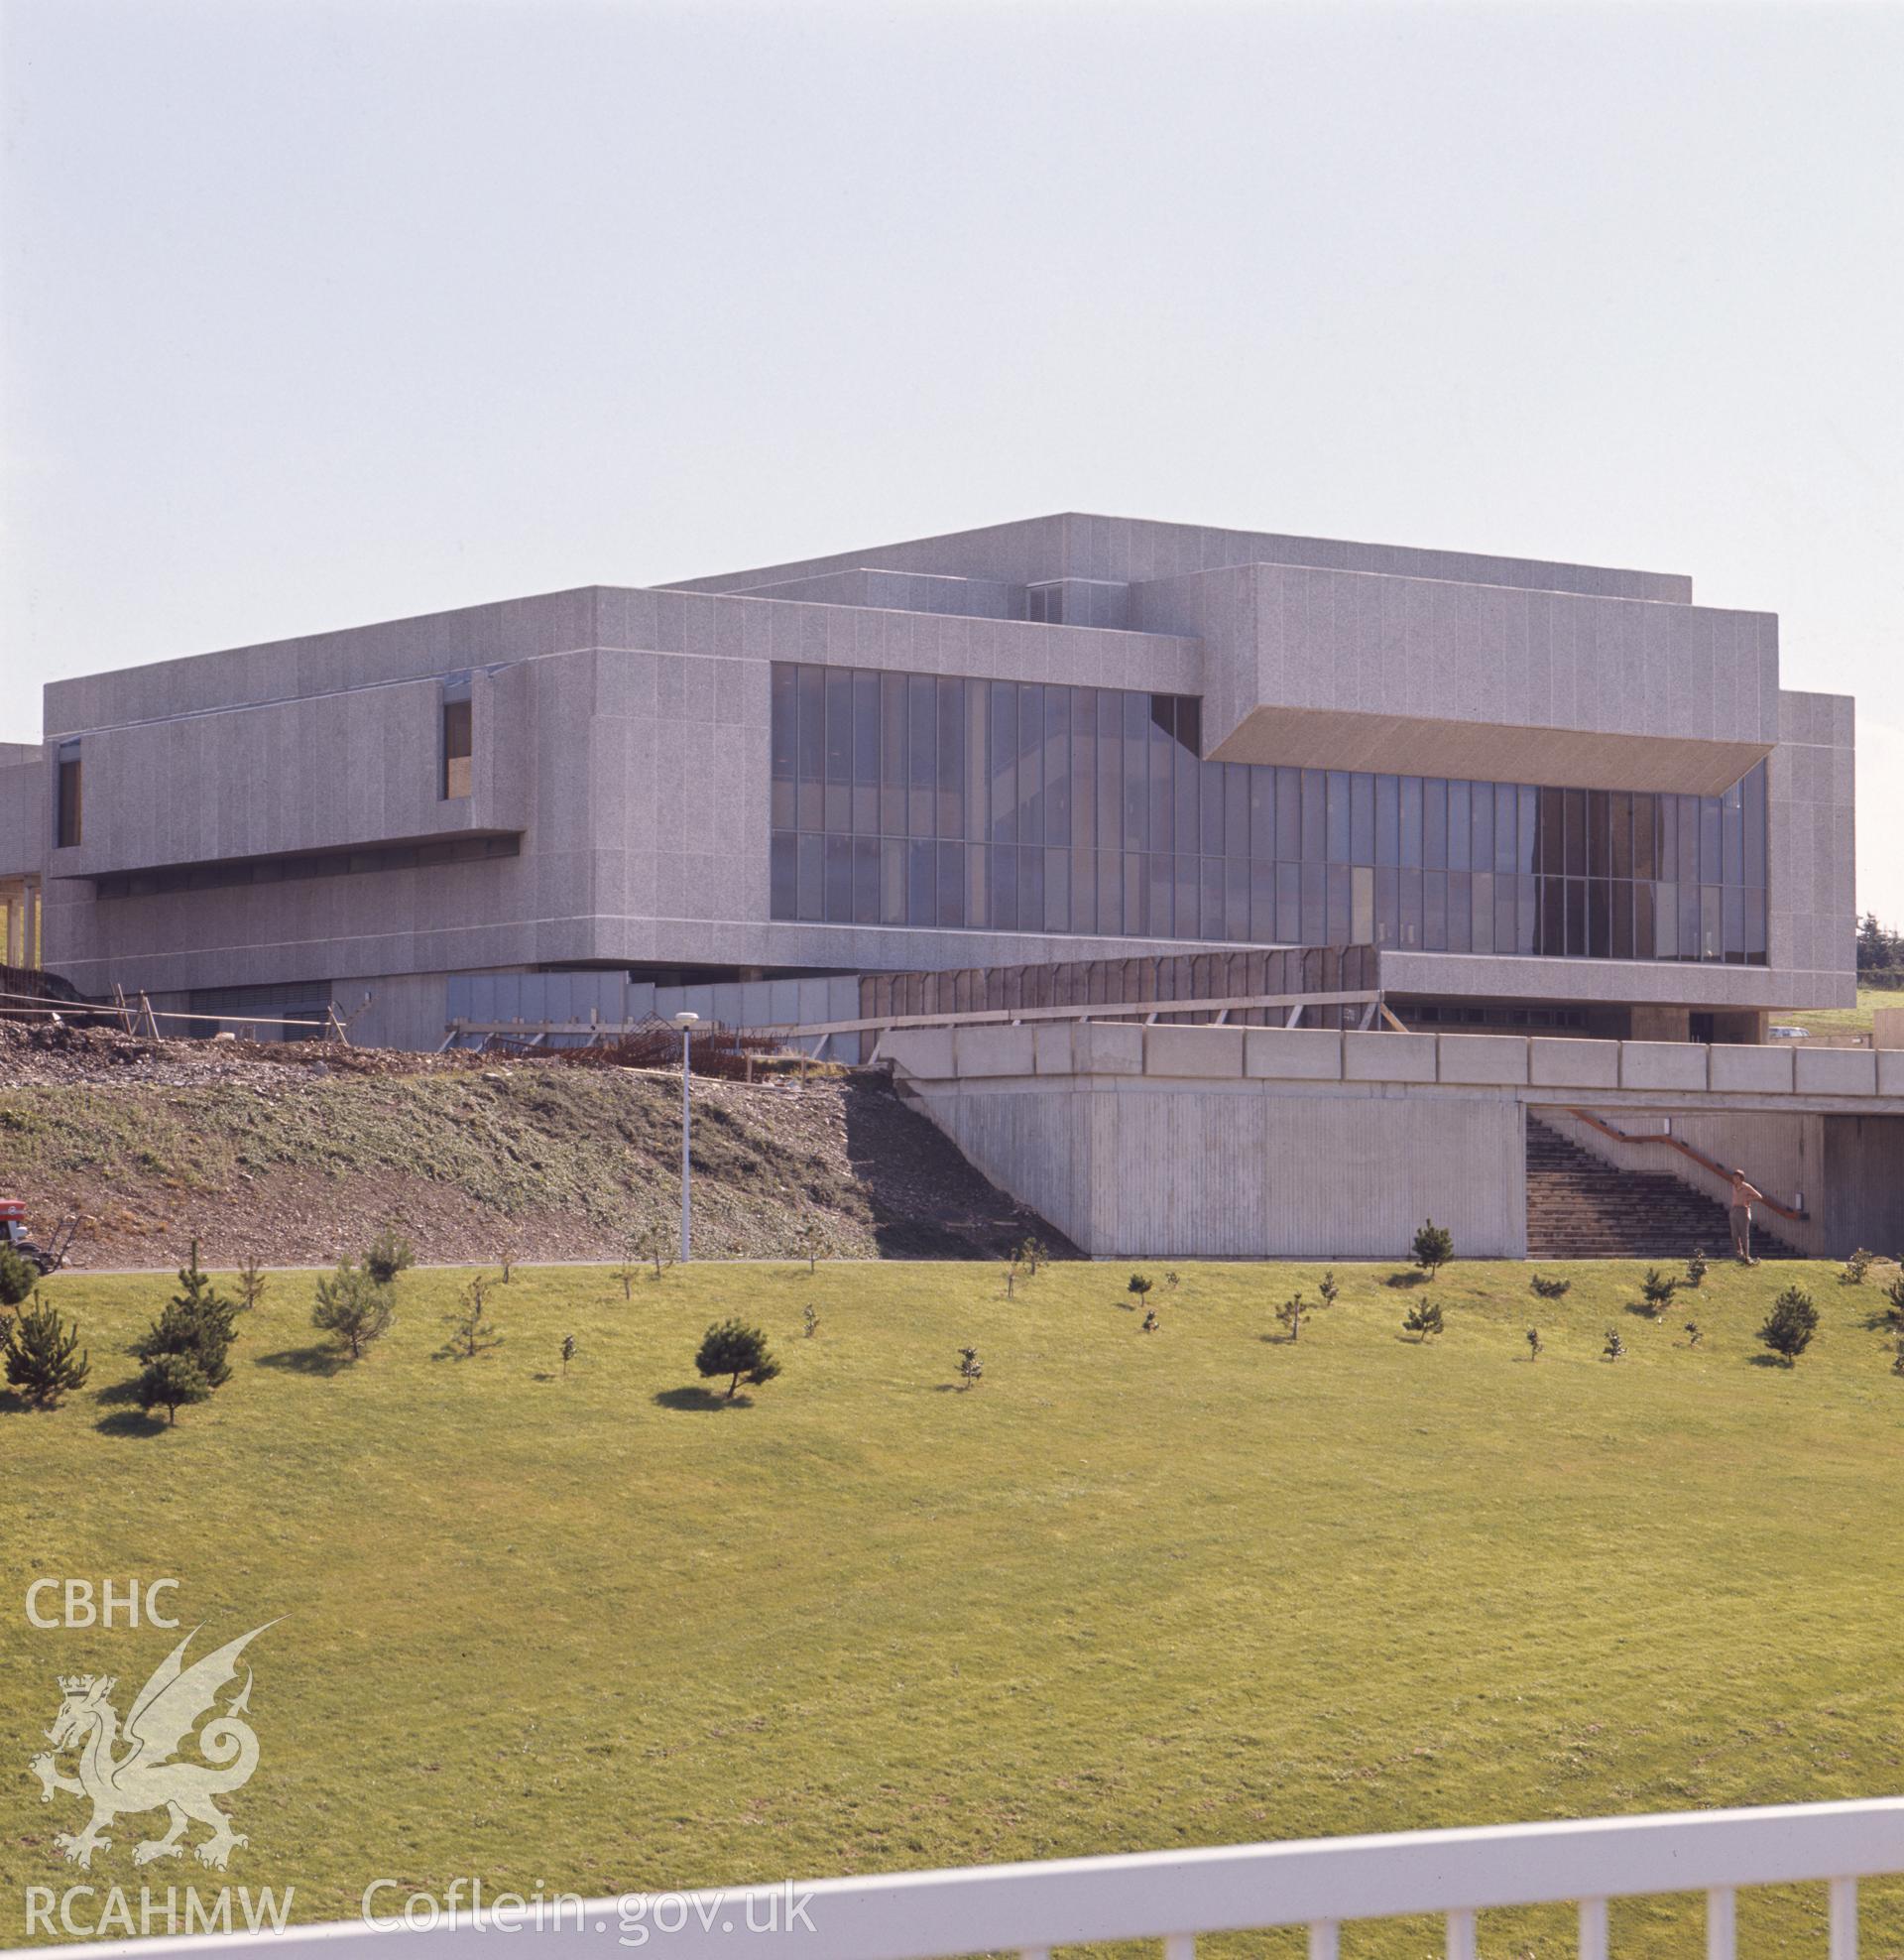 1 colour transparency showing view of Aberystwyth Arts Centre; collated by the former Central Office of Information.